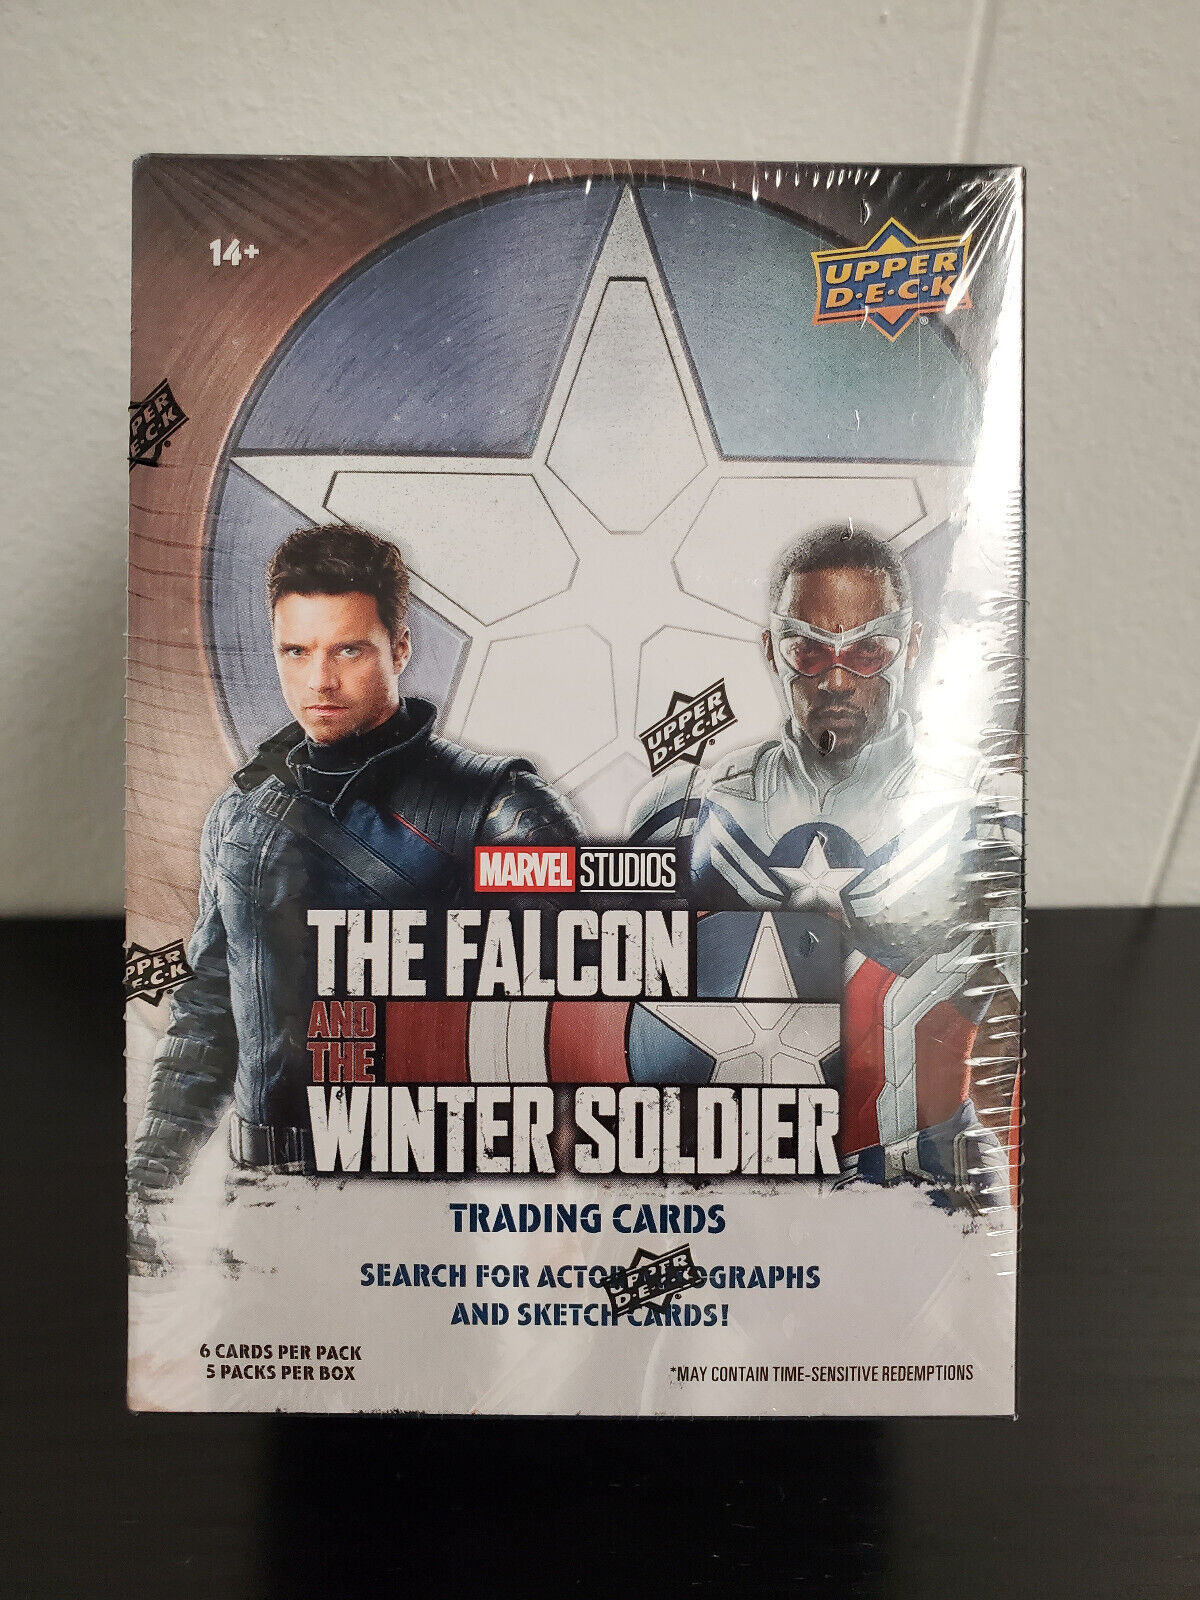 Upper Deck Marvel The Falcon and the Winter Soldier Retail Blaster Box Sealed.